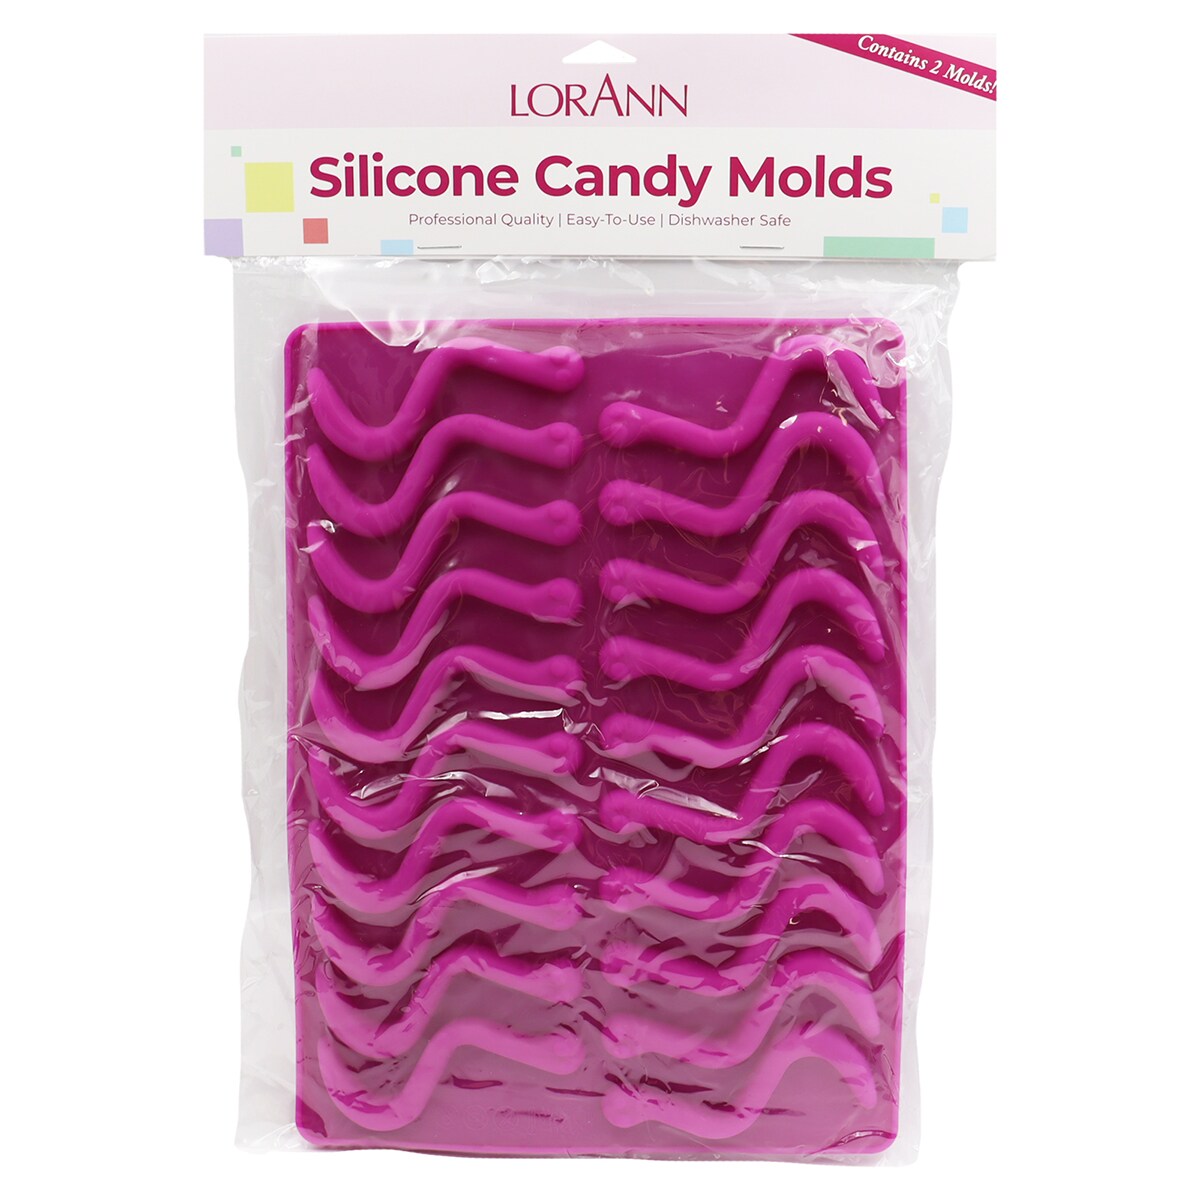 SILICONE GUMMY WORM Molds, 2-pack by Lorann, Candy Making Supplies